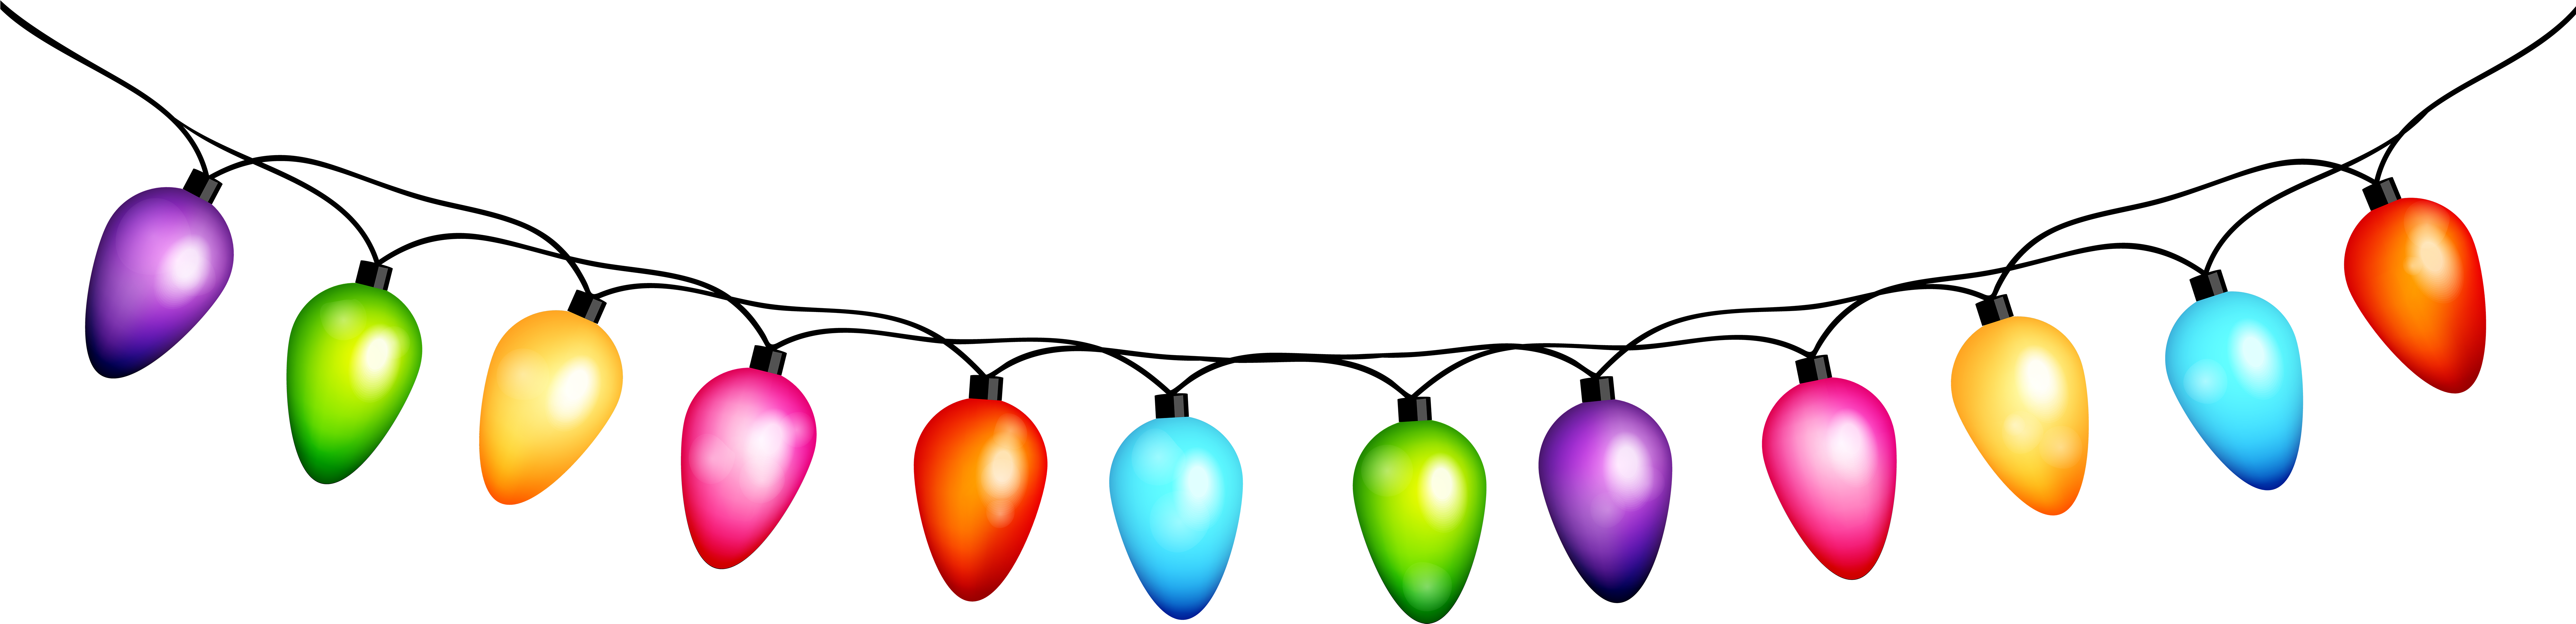 Colorful Christmas Lights Clipart PNG